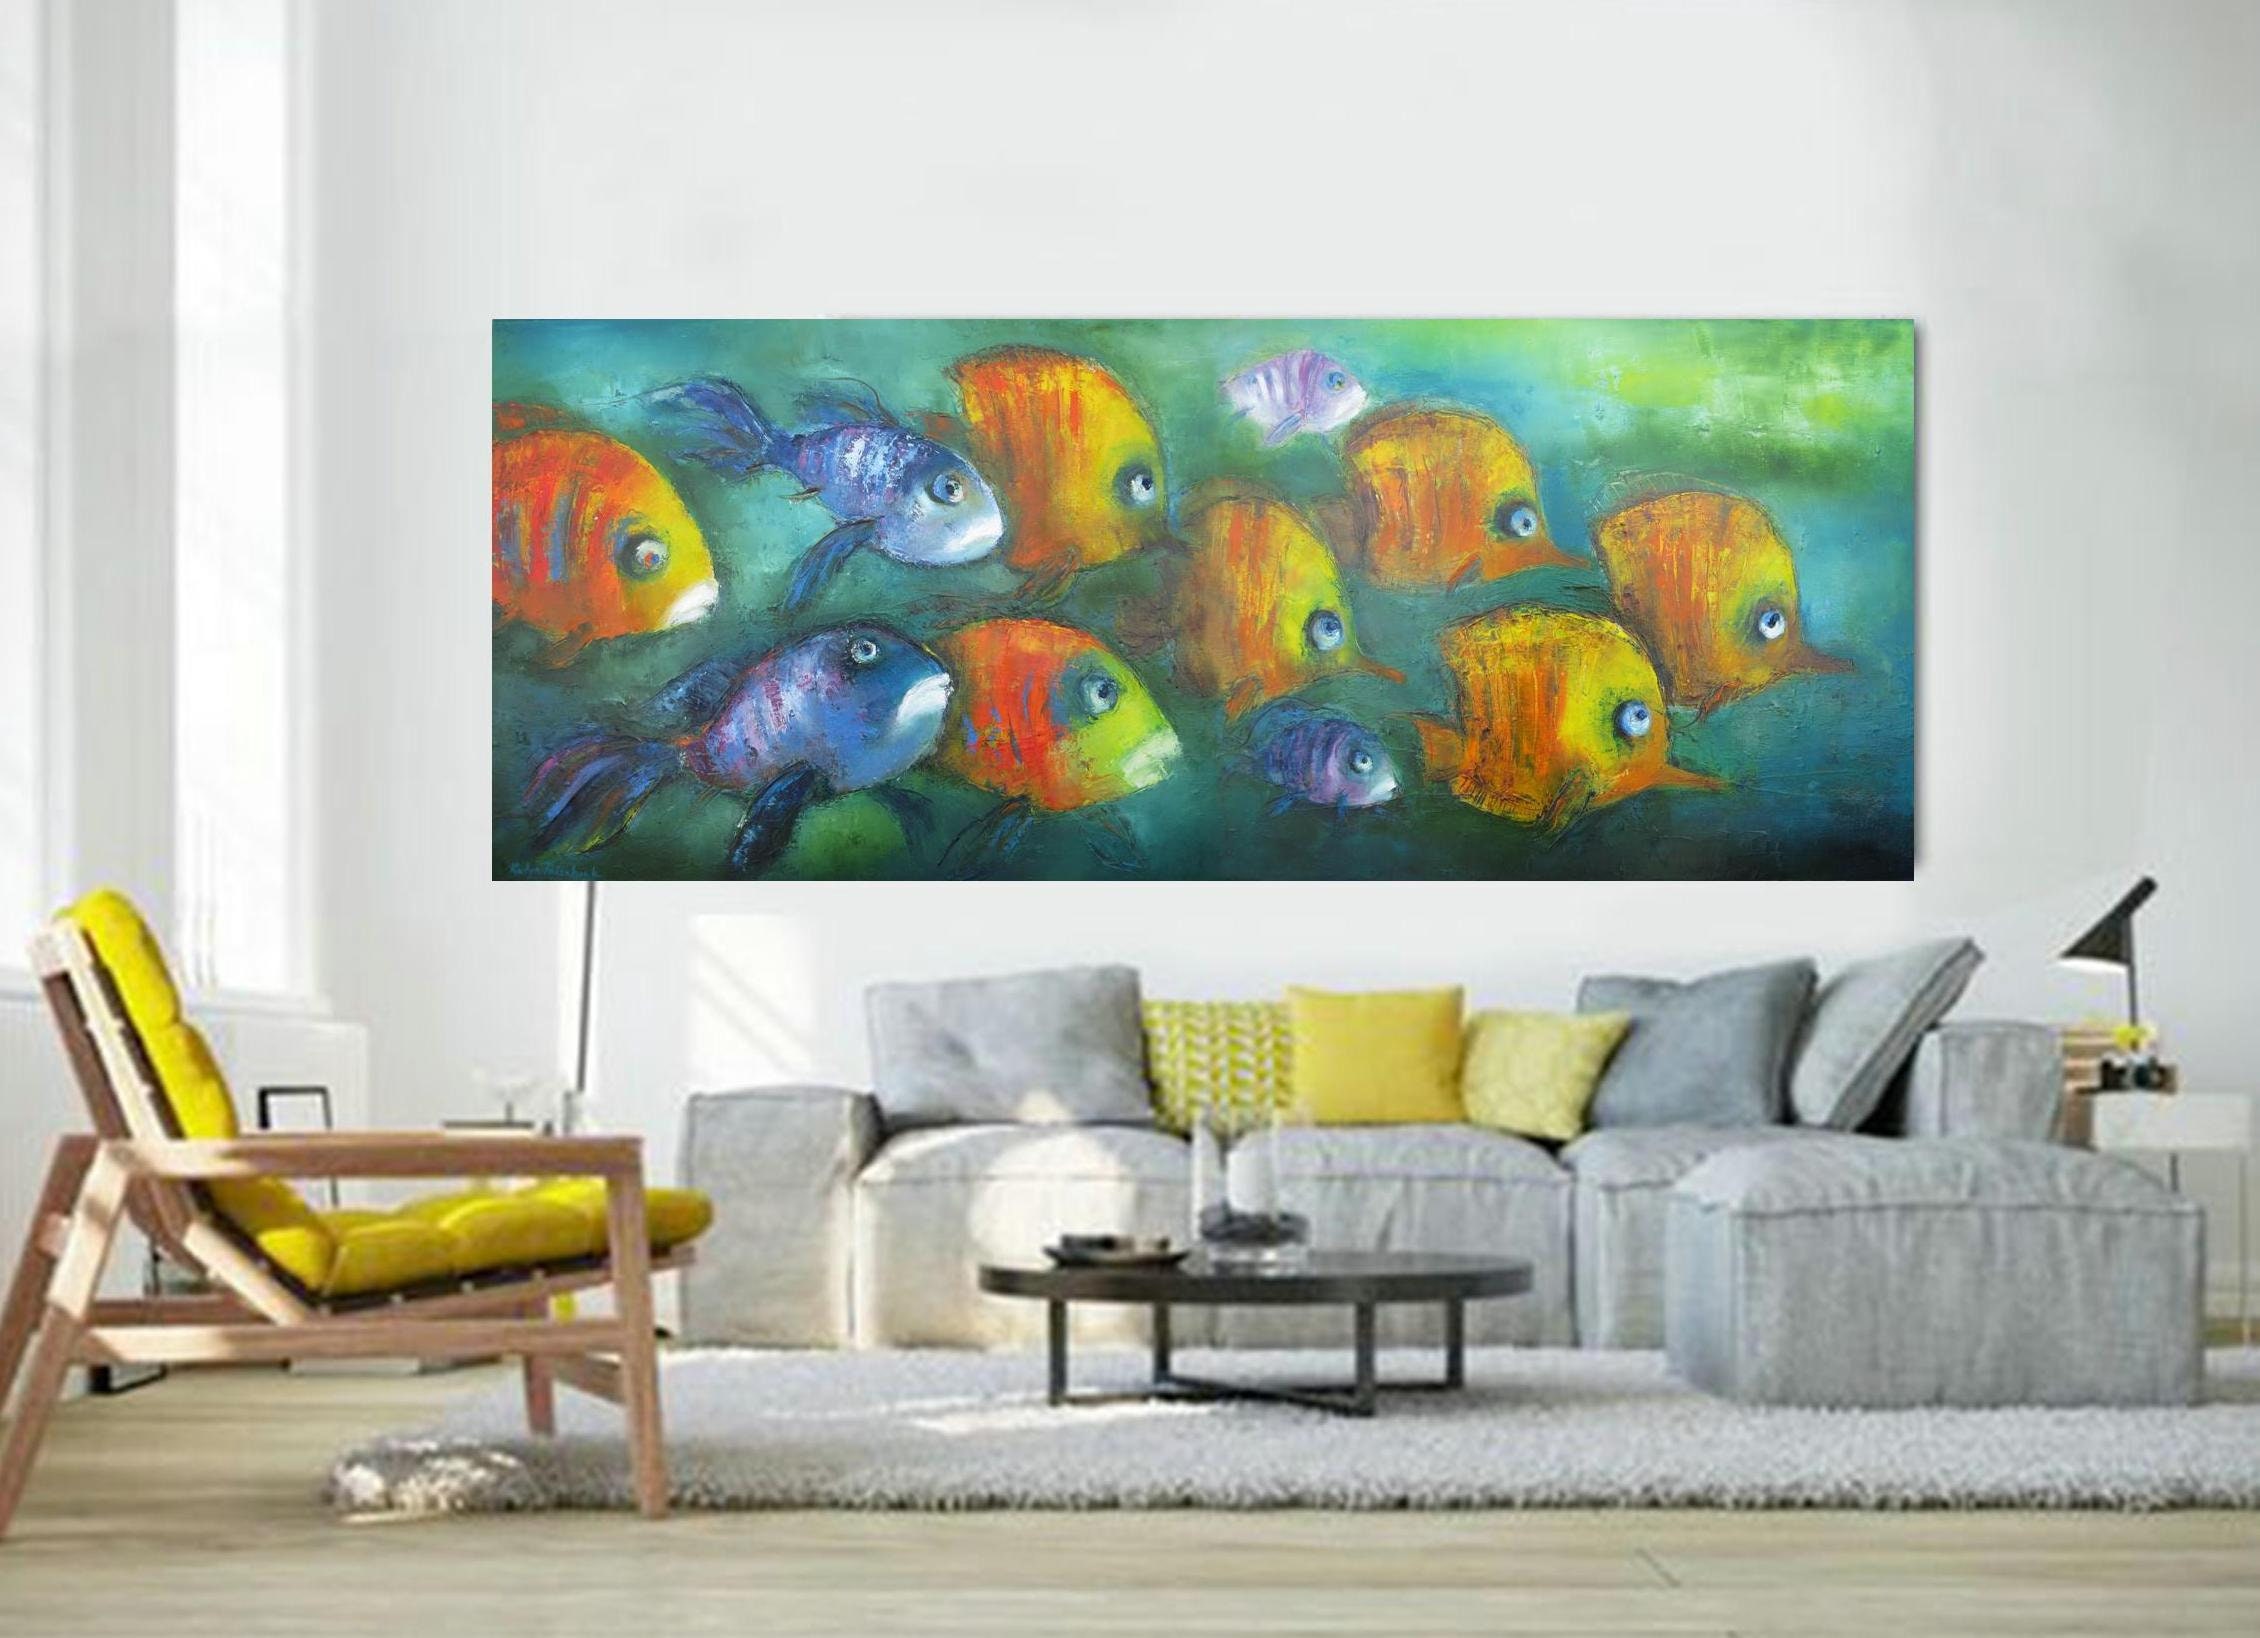 picture for feng shui canvas prints ocean world picture for office wall wall decor bedroom Ocean fish wall art romantic wedding gift